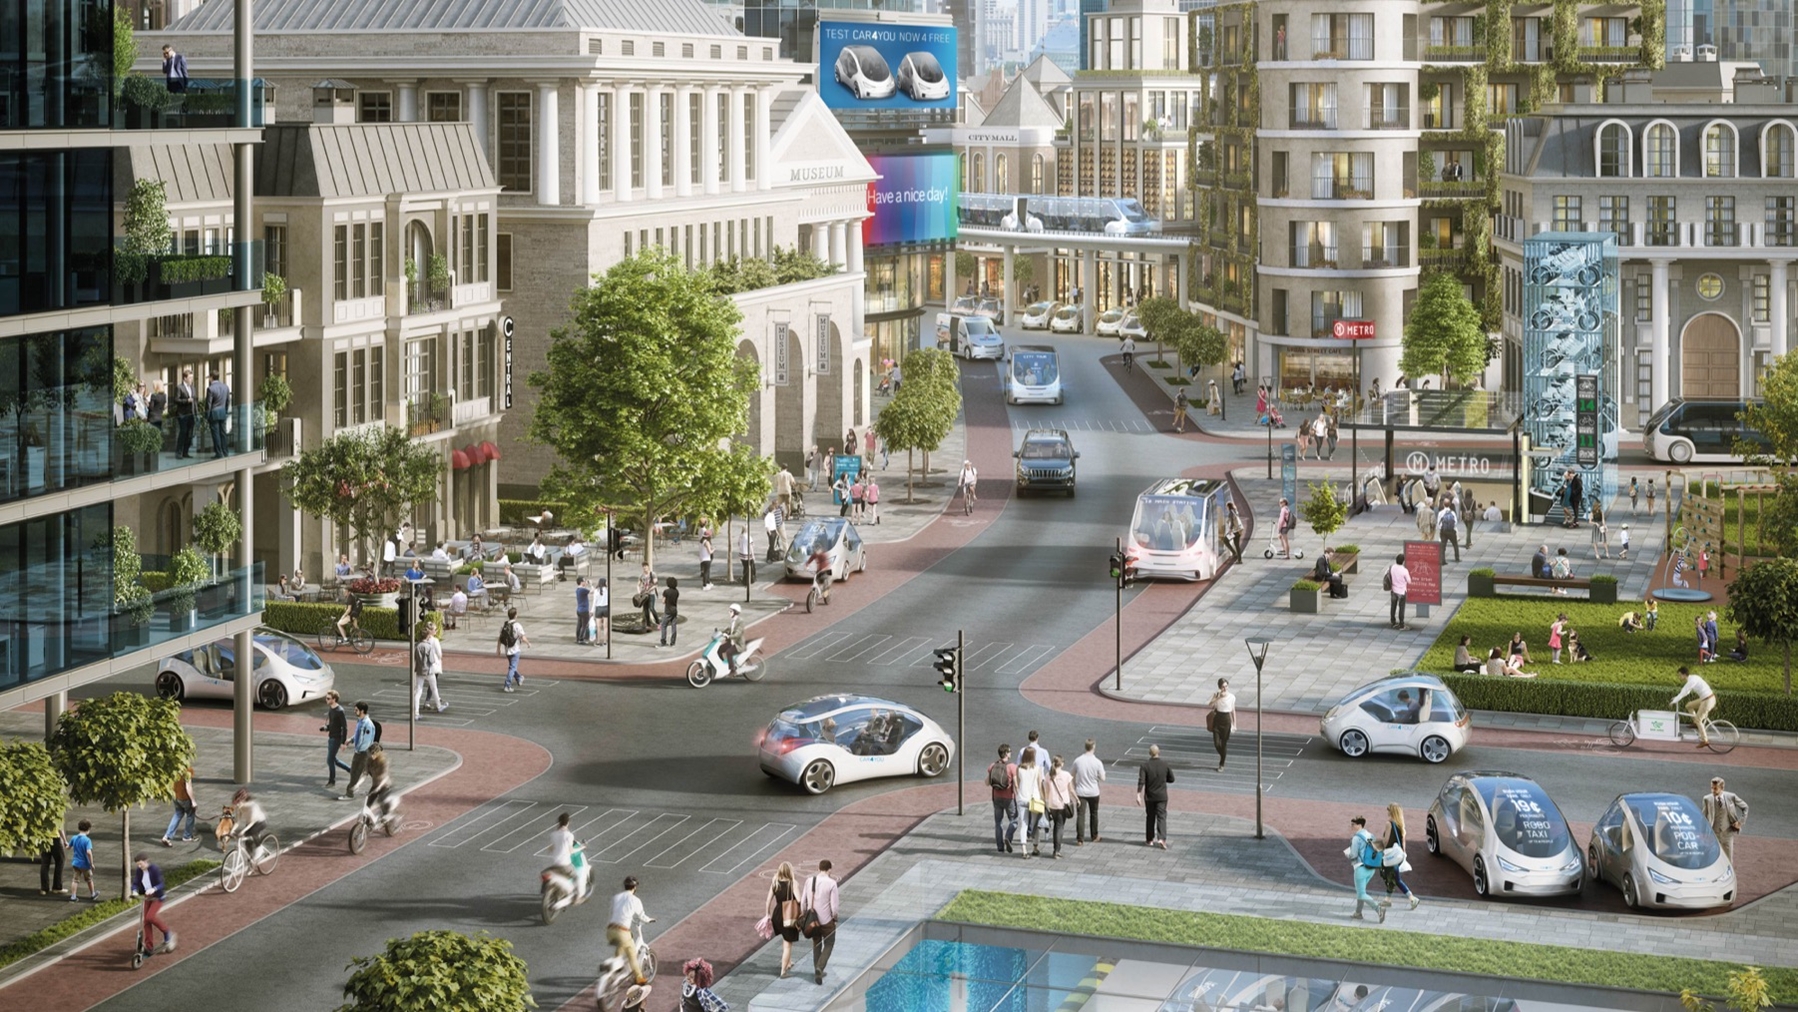 Bosch’s vision for smarter cities